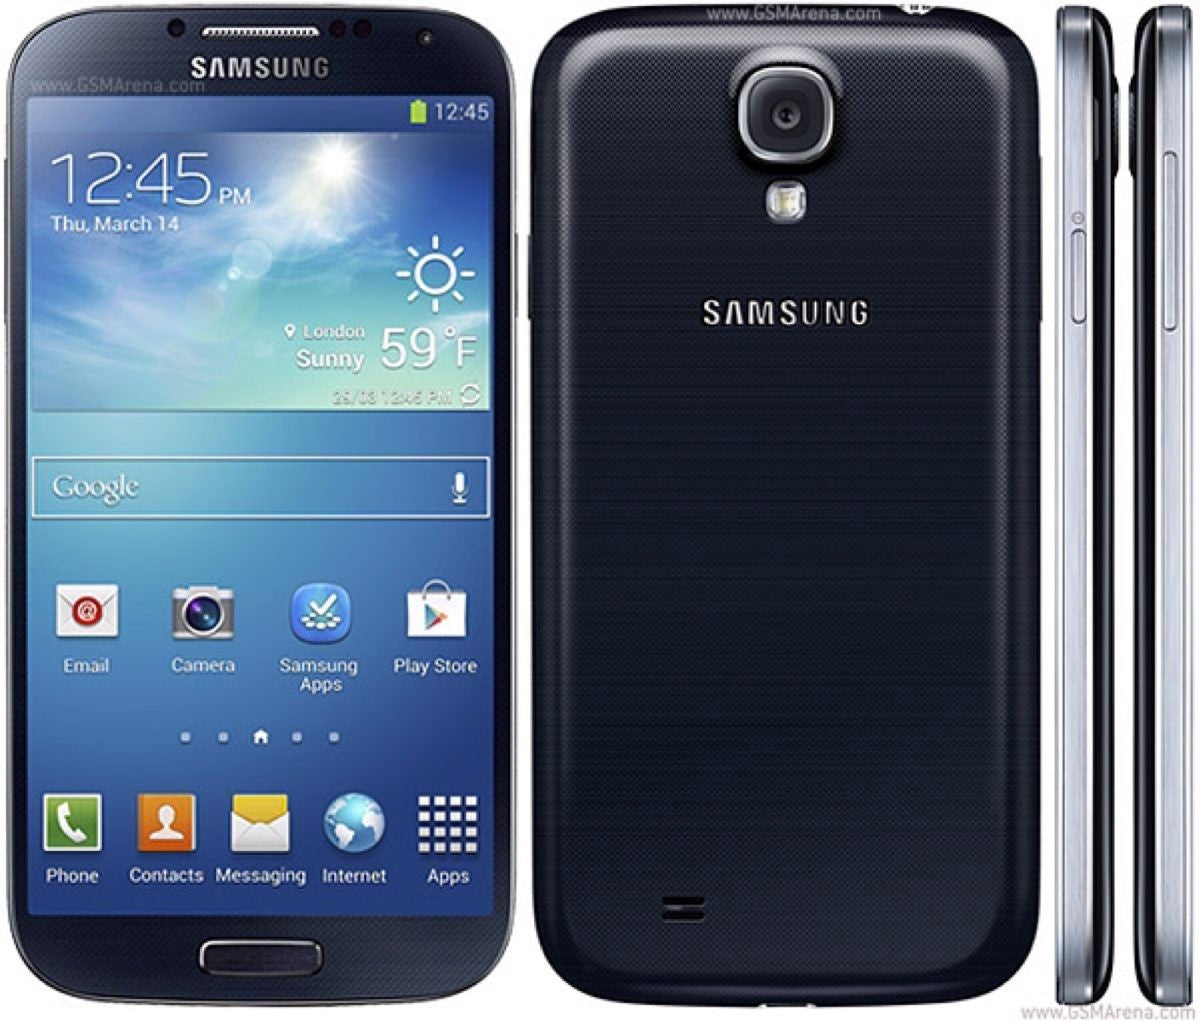 10M Galaxy S4 pre-orders in 2 weeks, smaller and cheaper version due soon